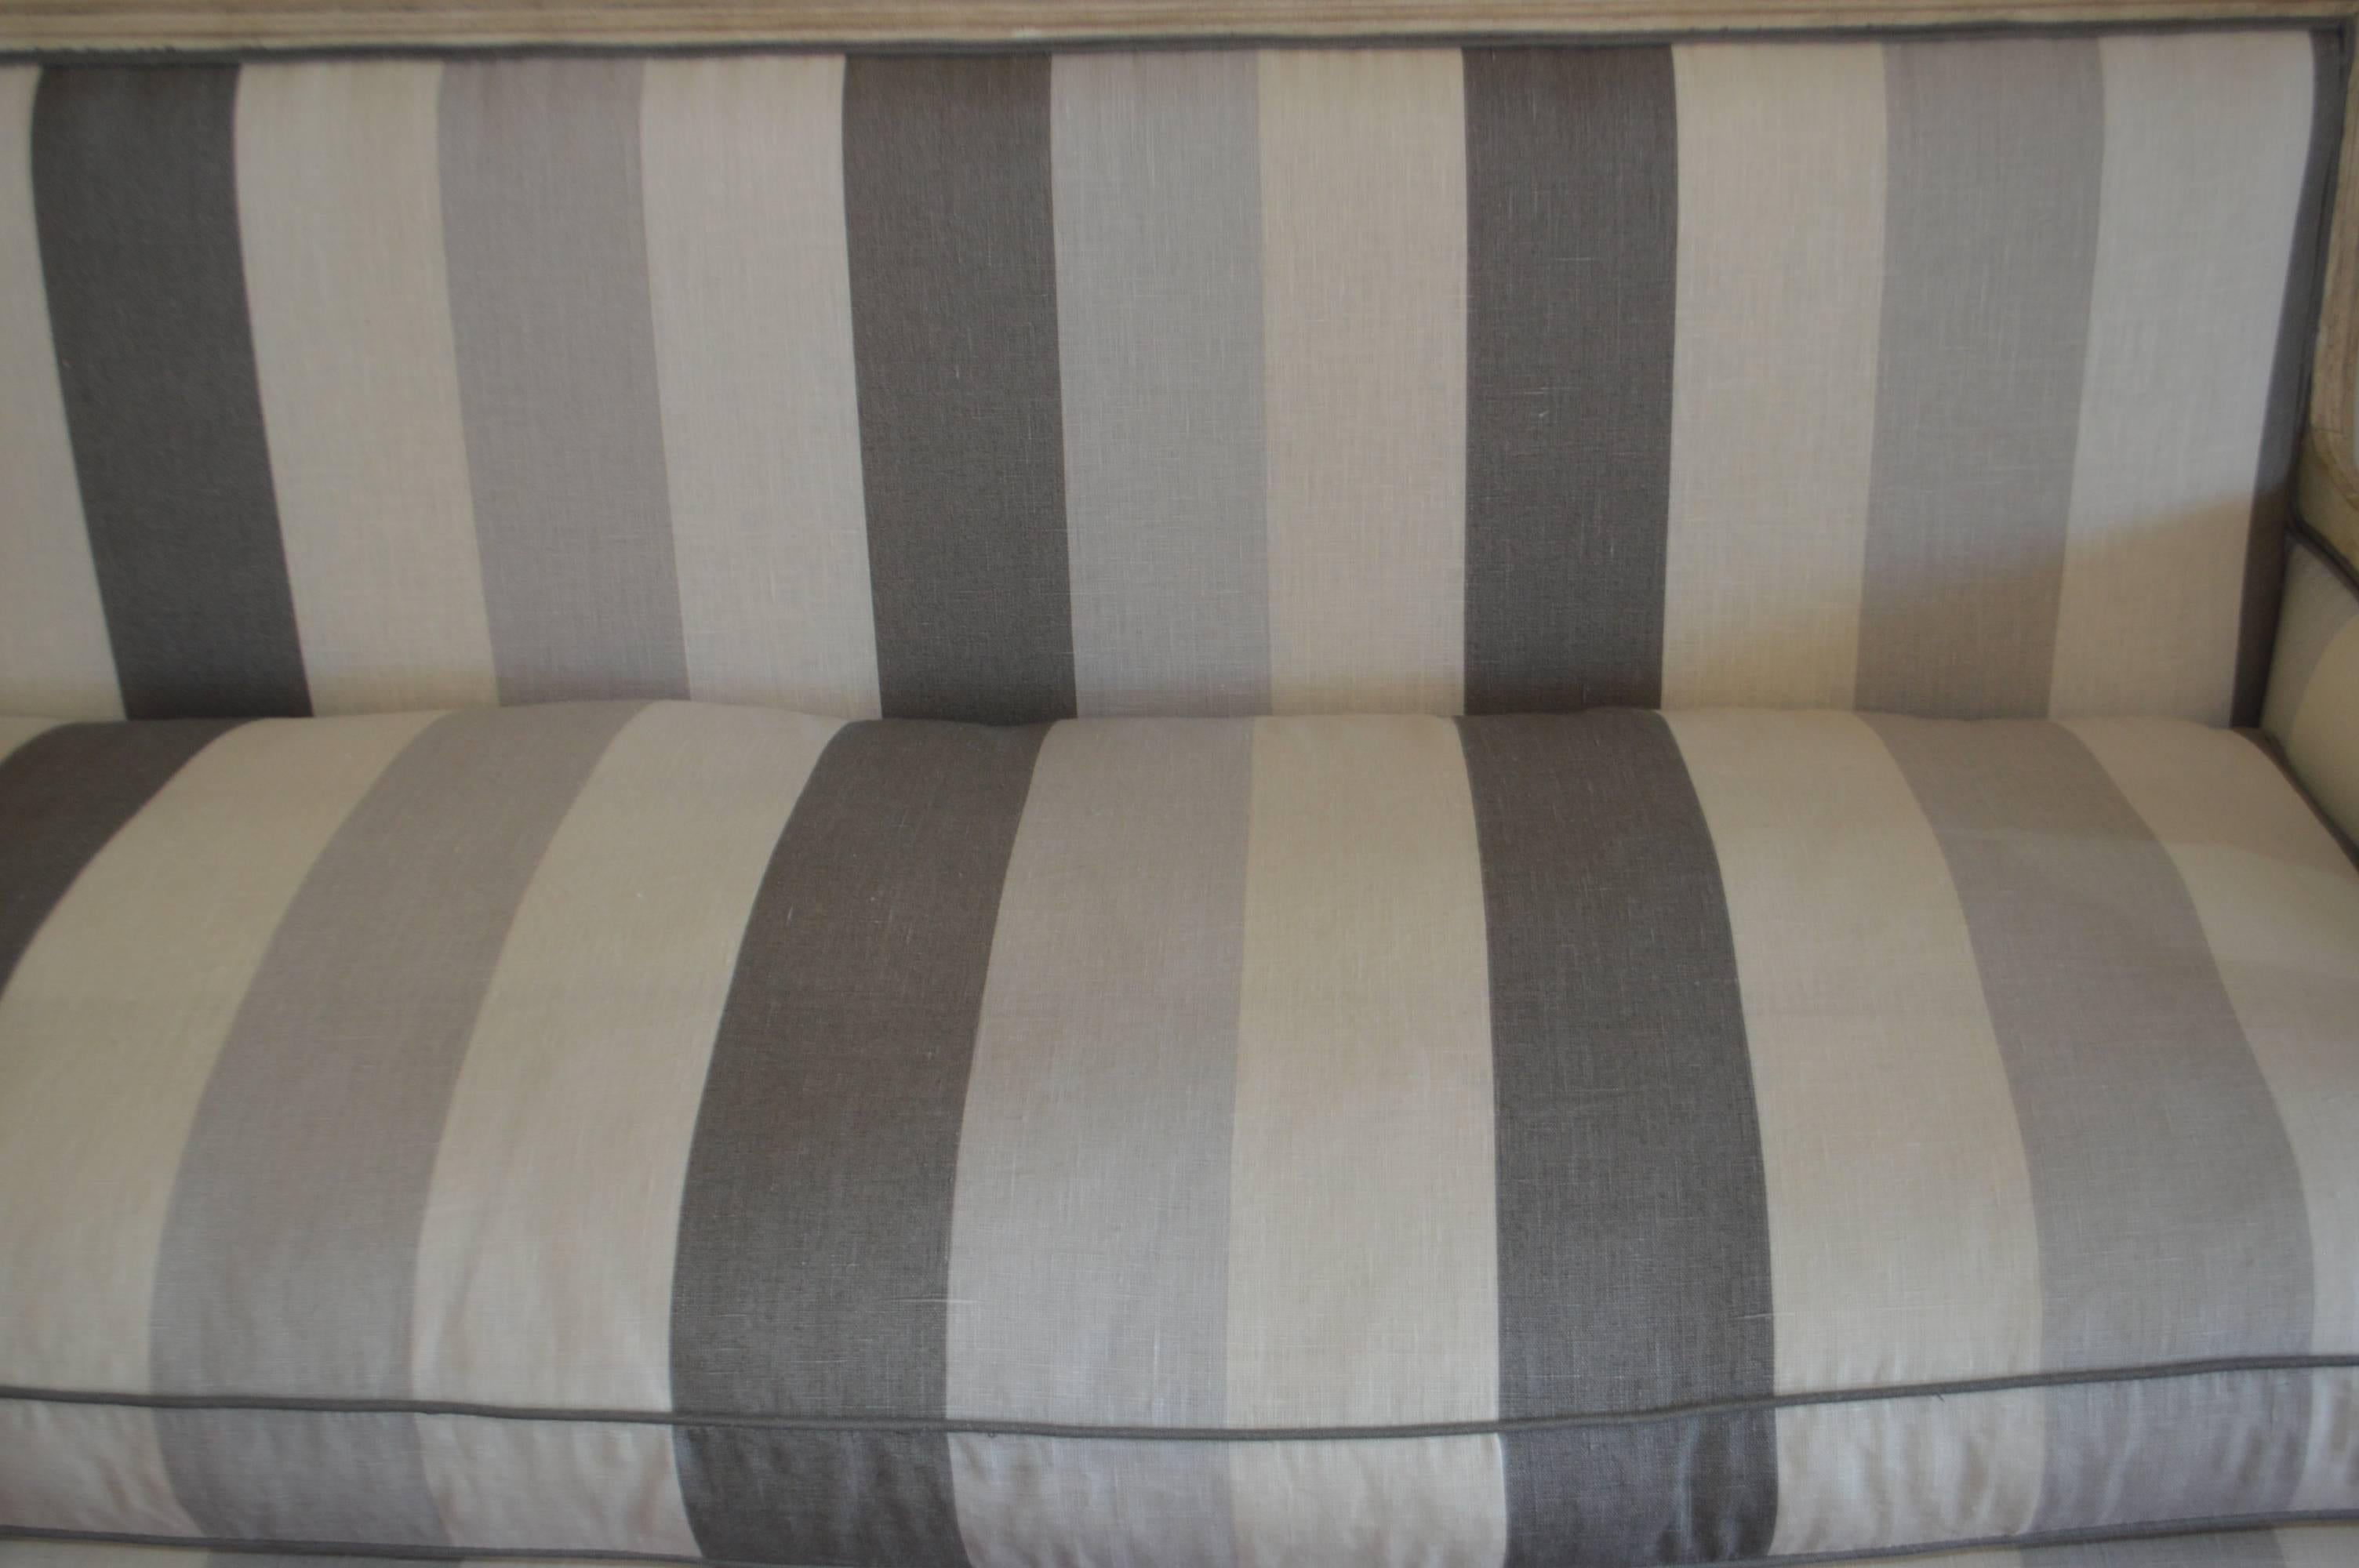 Louis XVI style square back sofa having the original patina but newly upholstered in a stylist and an attractive stripe linen fabric. The seat cushion is a mixture of dawn and feathers, very comfortable sofa.
The colors of the linen stripe are